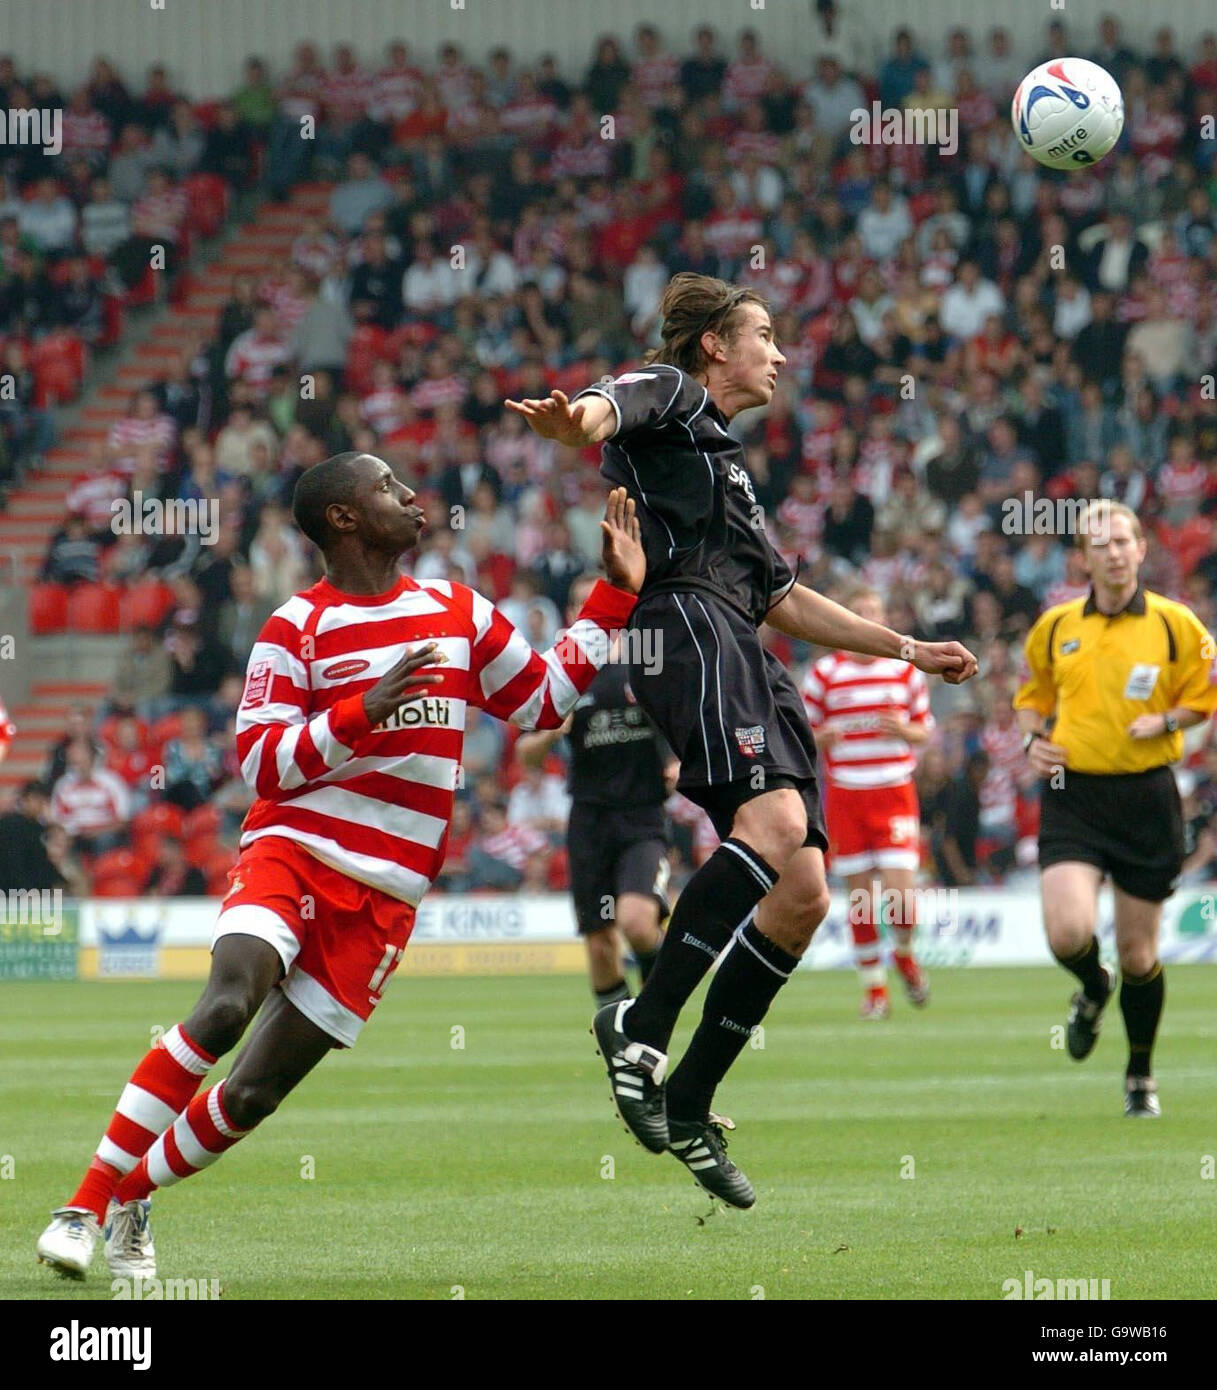 Doncaster's Jonathan Forte (left) in action with Brentford's Adam Griffiths during the Coca-Cola Football League One match at the Keepmoat Stadium, Doncaster. Stock Photo